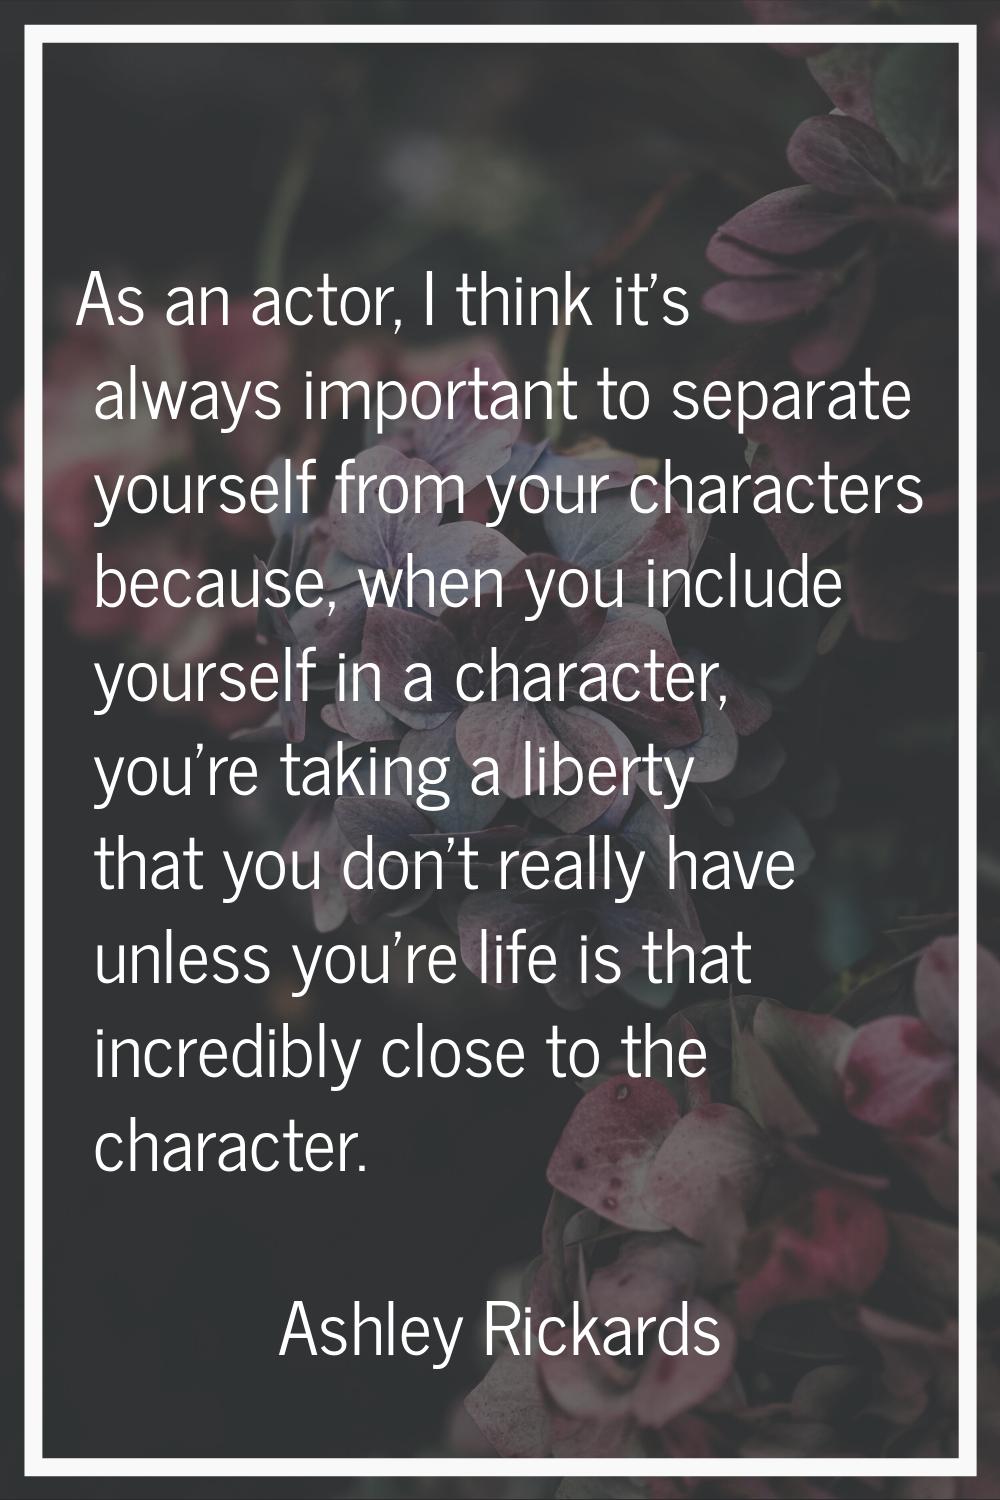 As an actor, I think it's always important to separate yourself from your characters because, when 